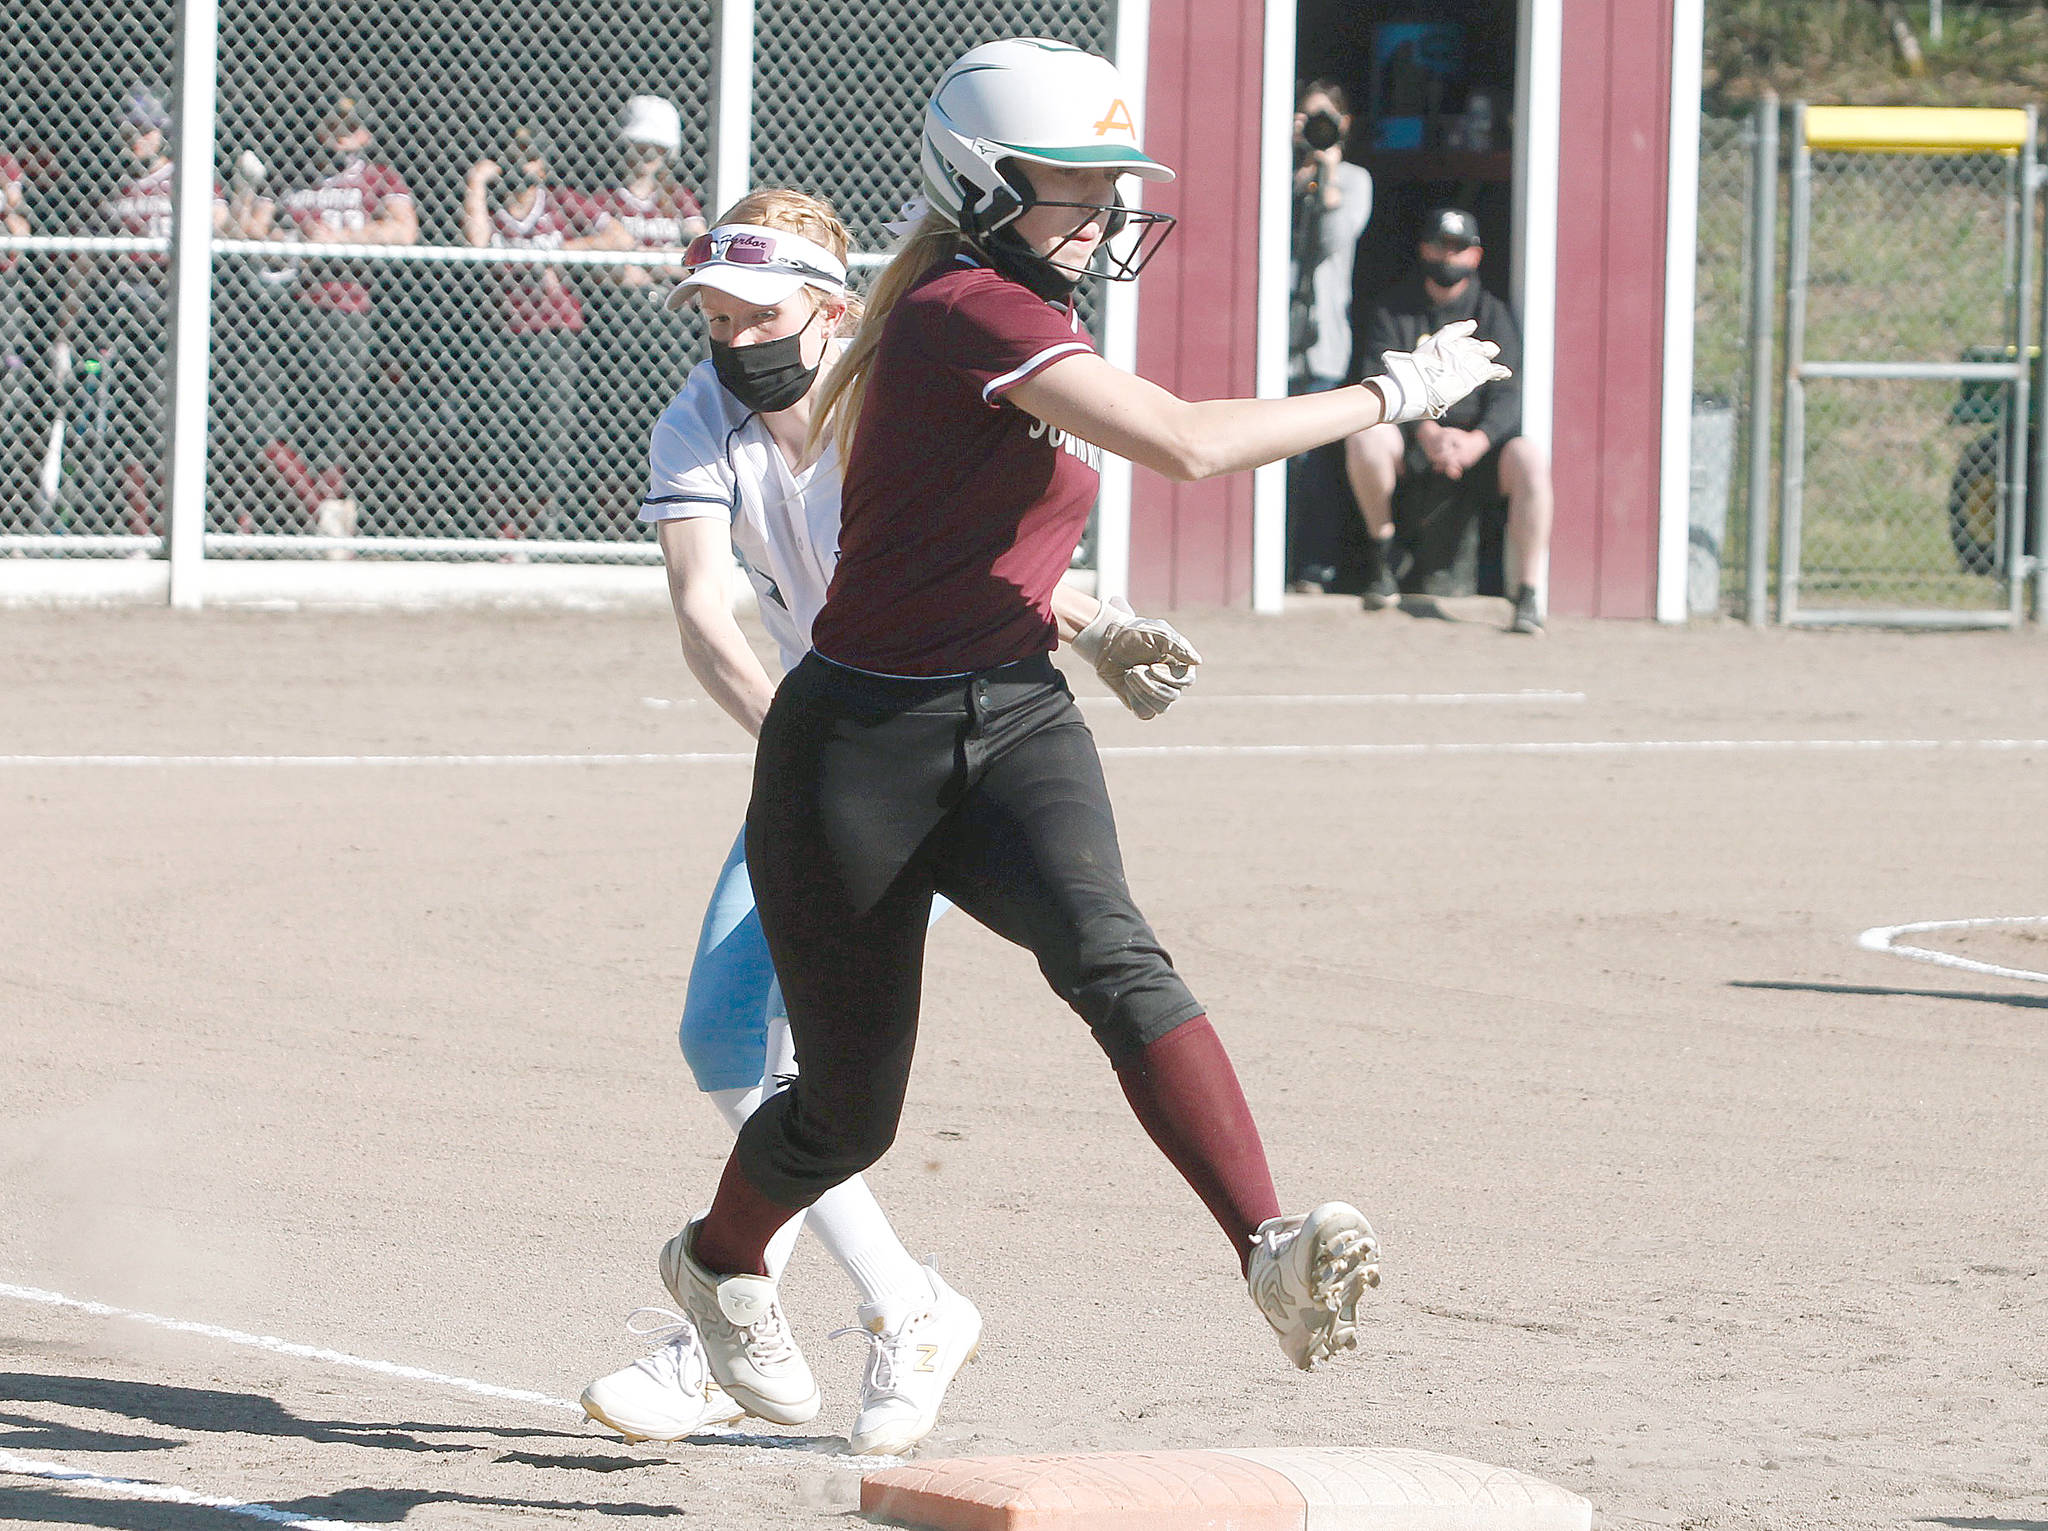 Marisol Bergstrom led South Kitsap with a .600 batting average and 28 stolen bases this year. (Independent File Photo)